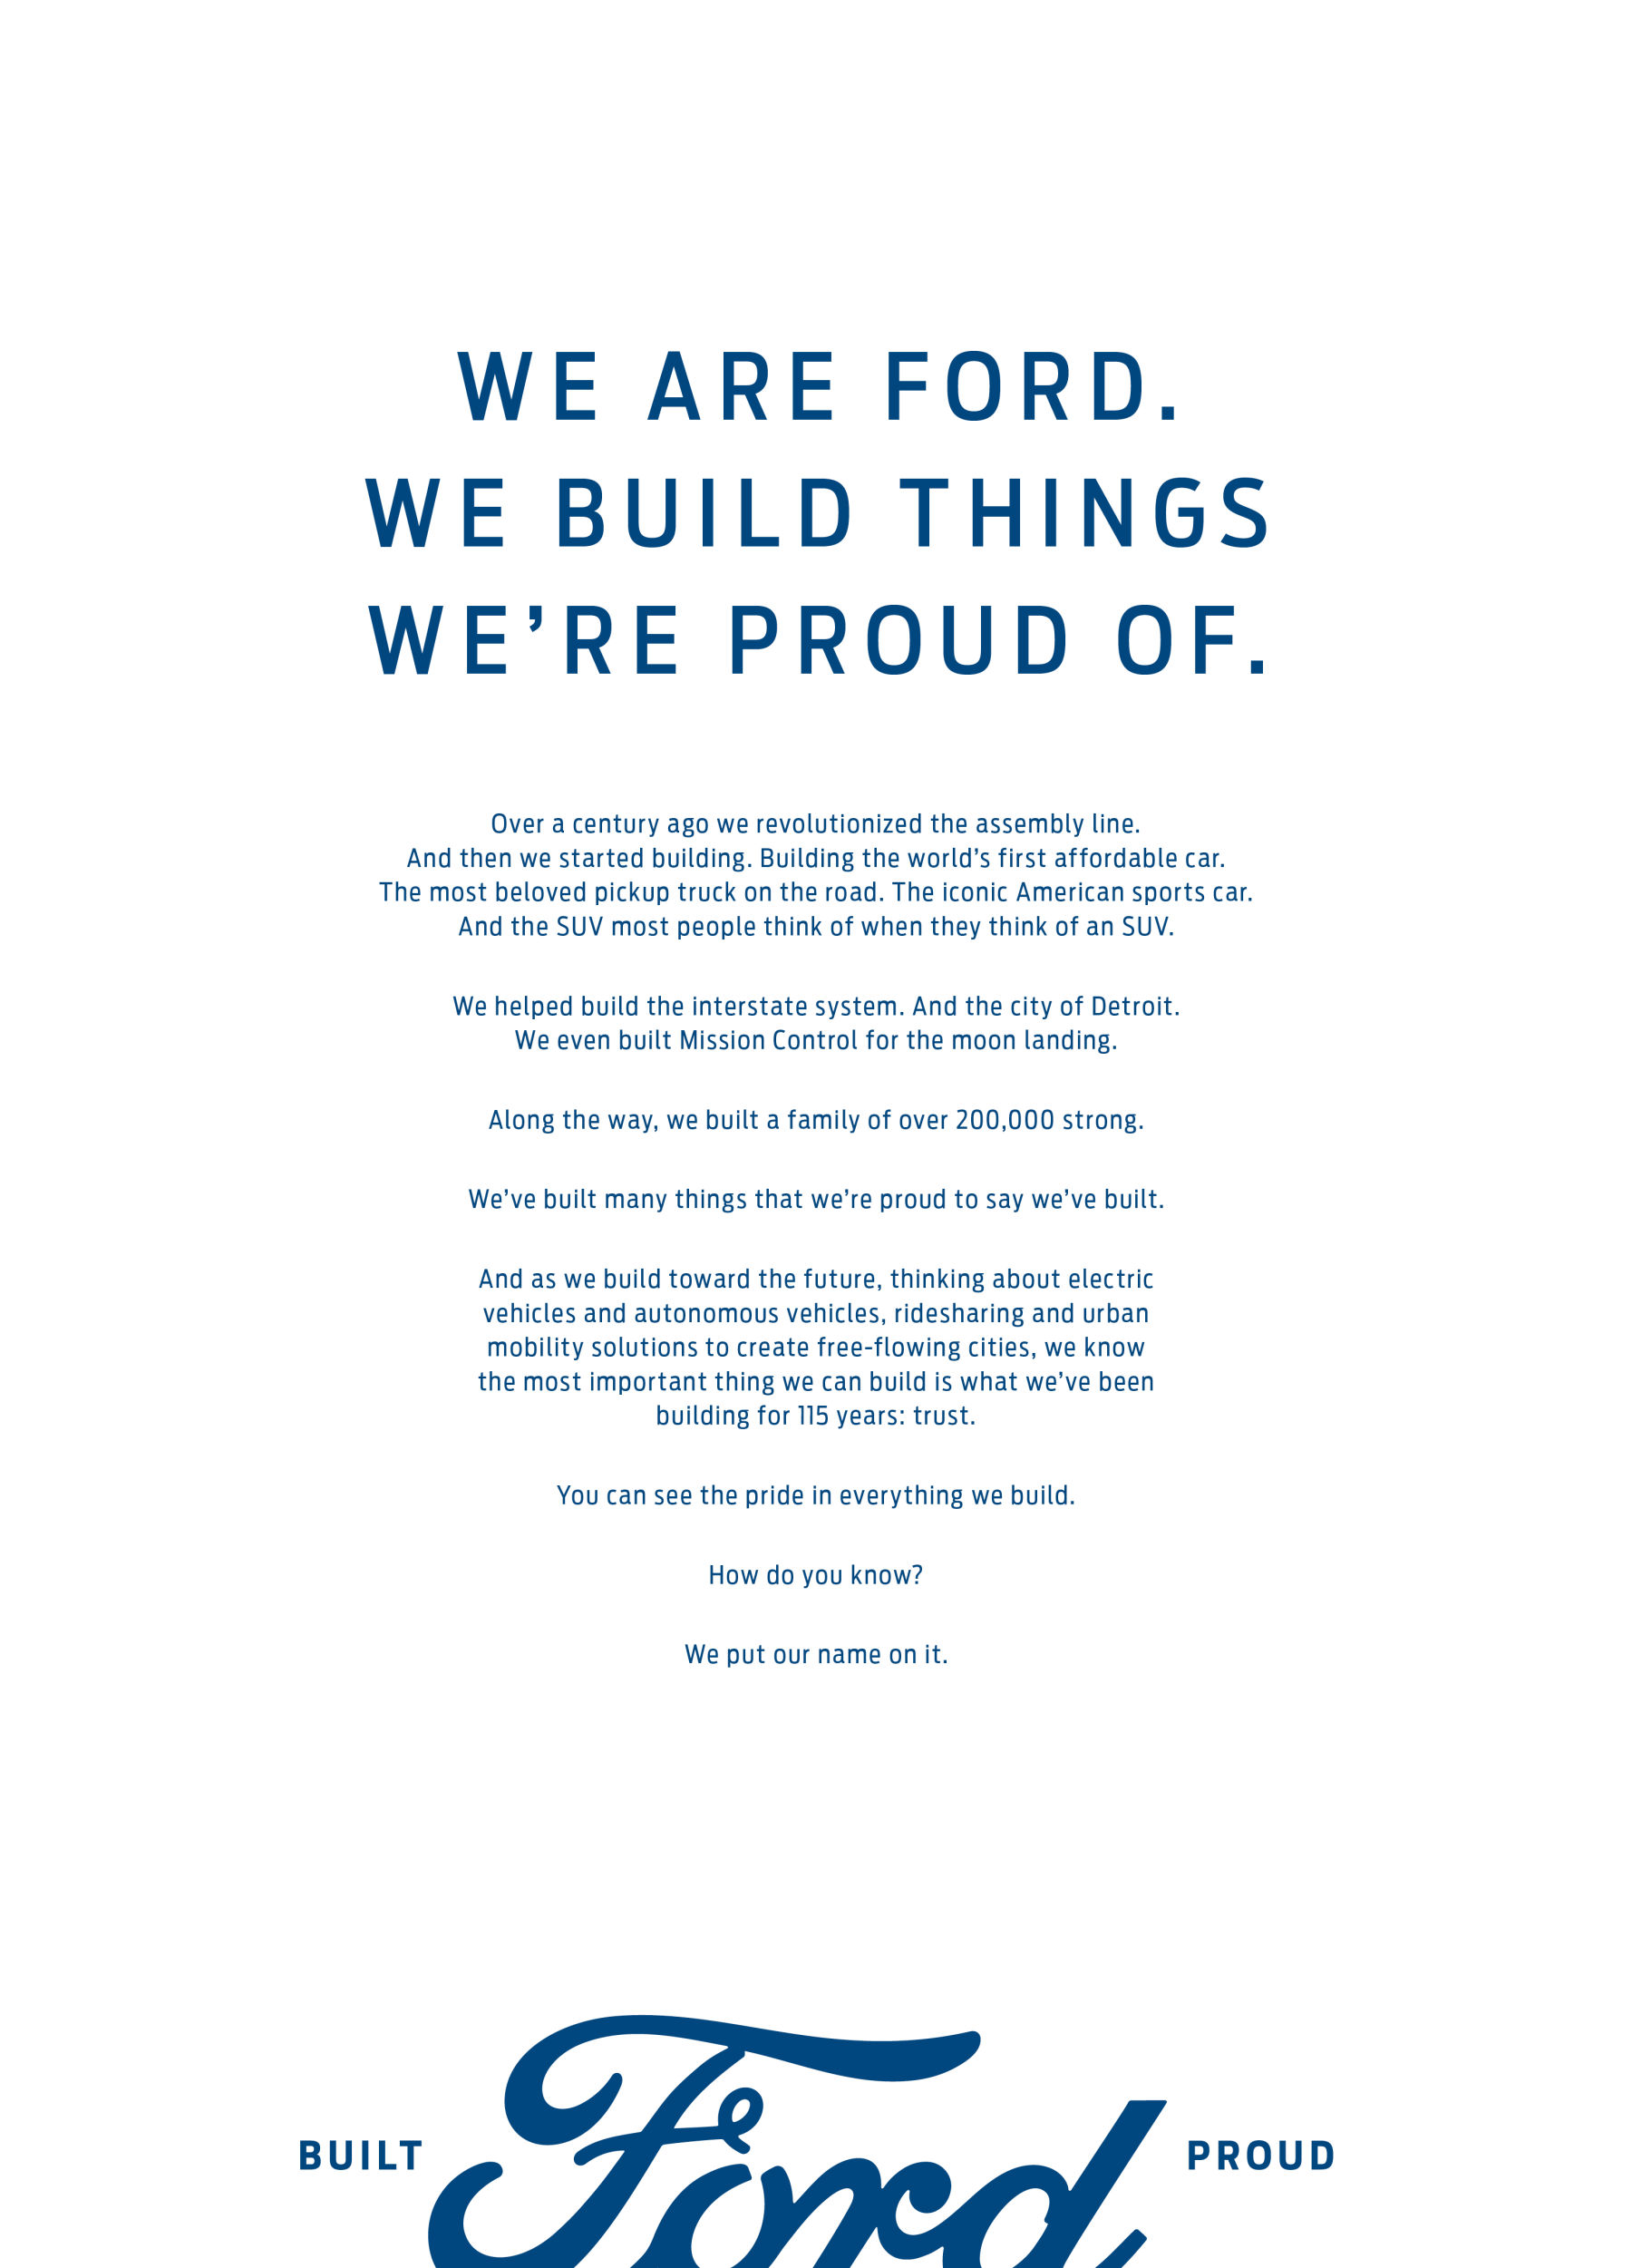 Ford: WE ARE FORD Print